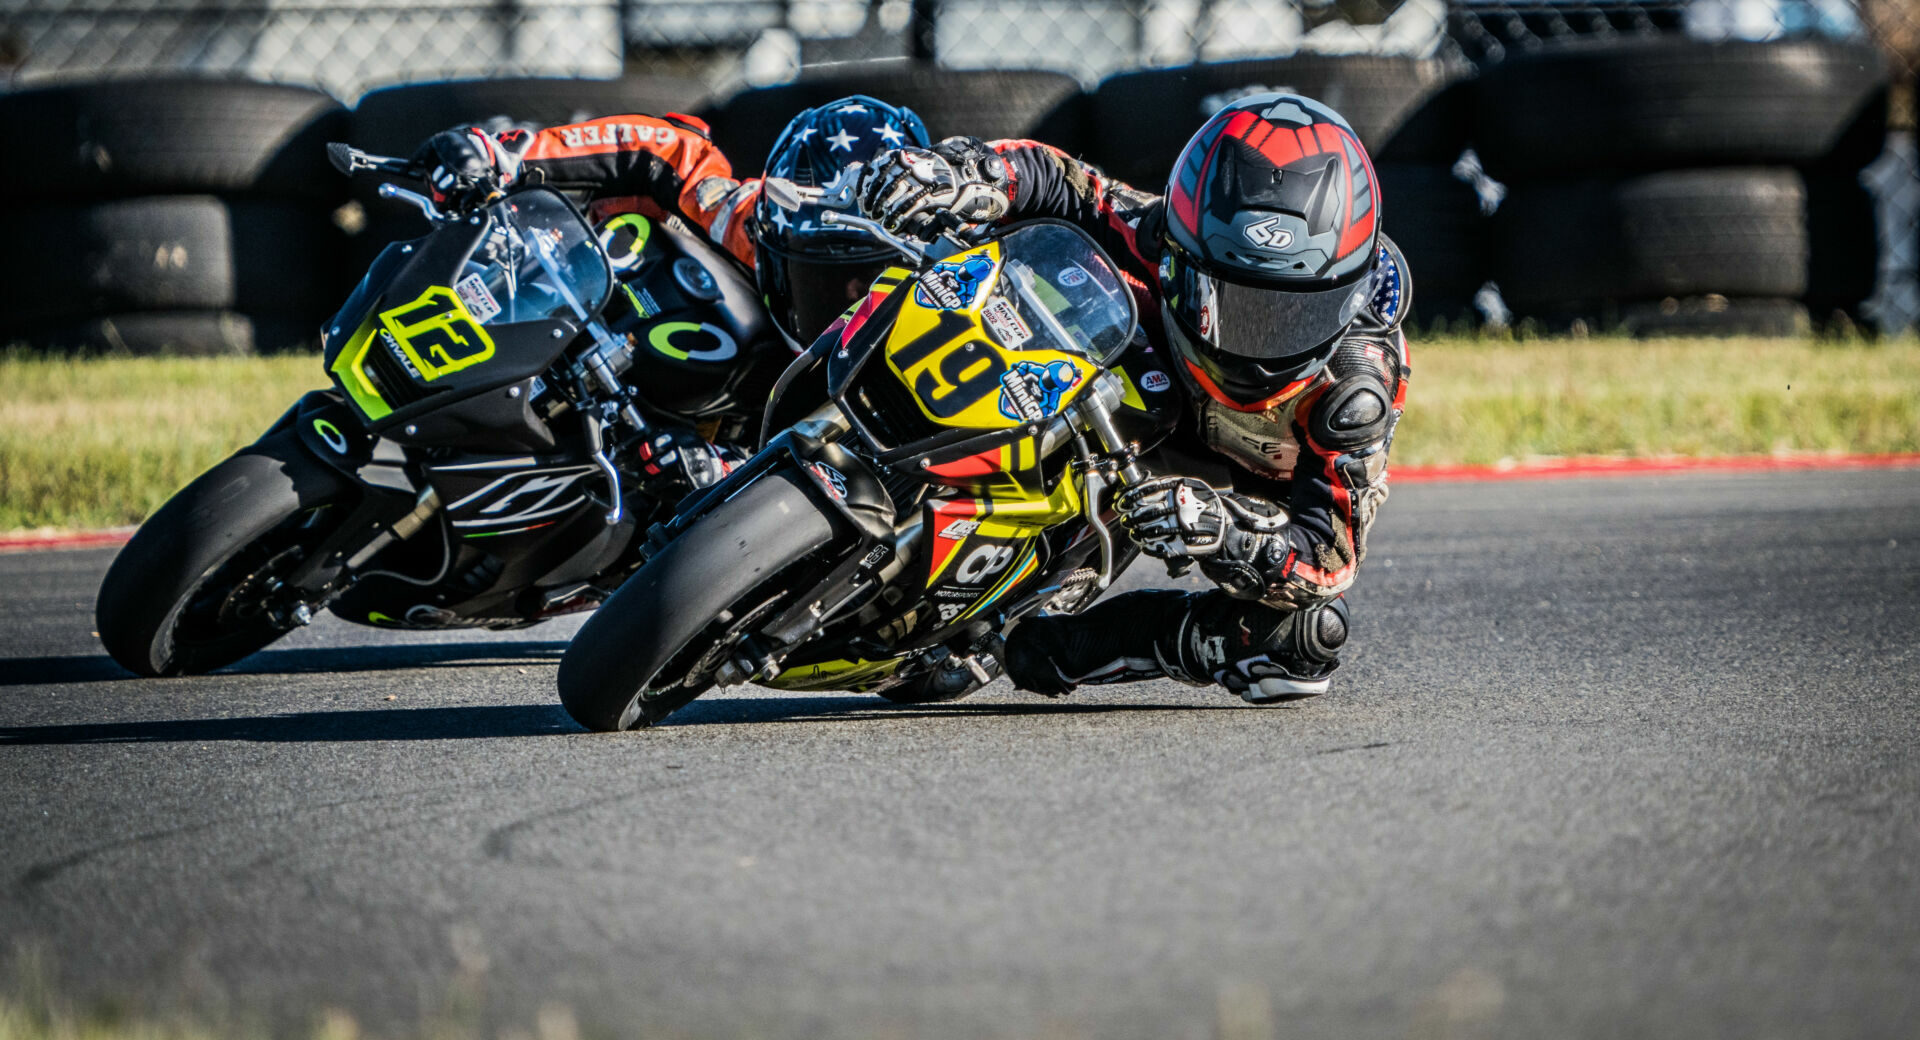 Nathan Gouker (19) and Anthony Lupo Jr. (12) battling for position on the kart track at Ridge Motorsports Park. Photo by Dustin Ishikura/Fast Glass Media.